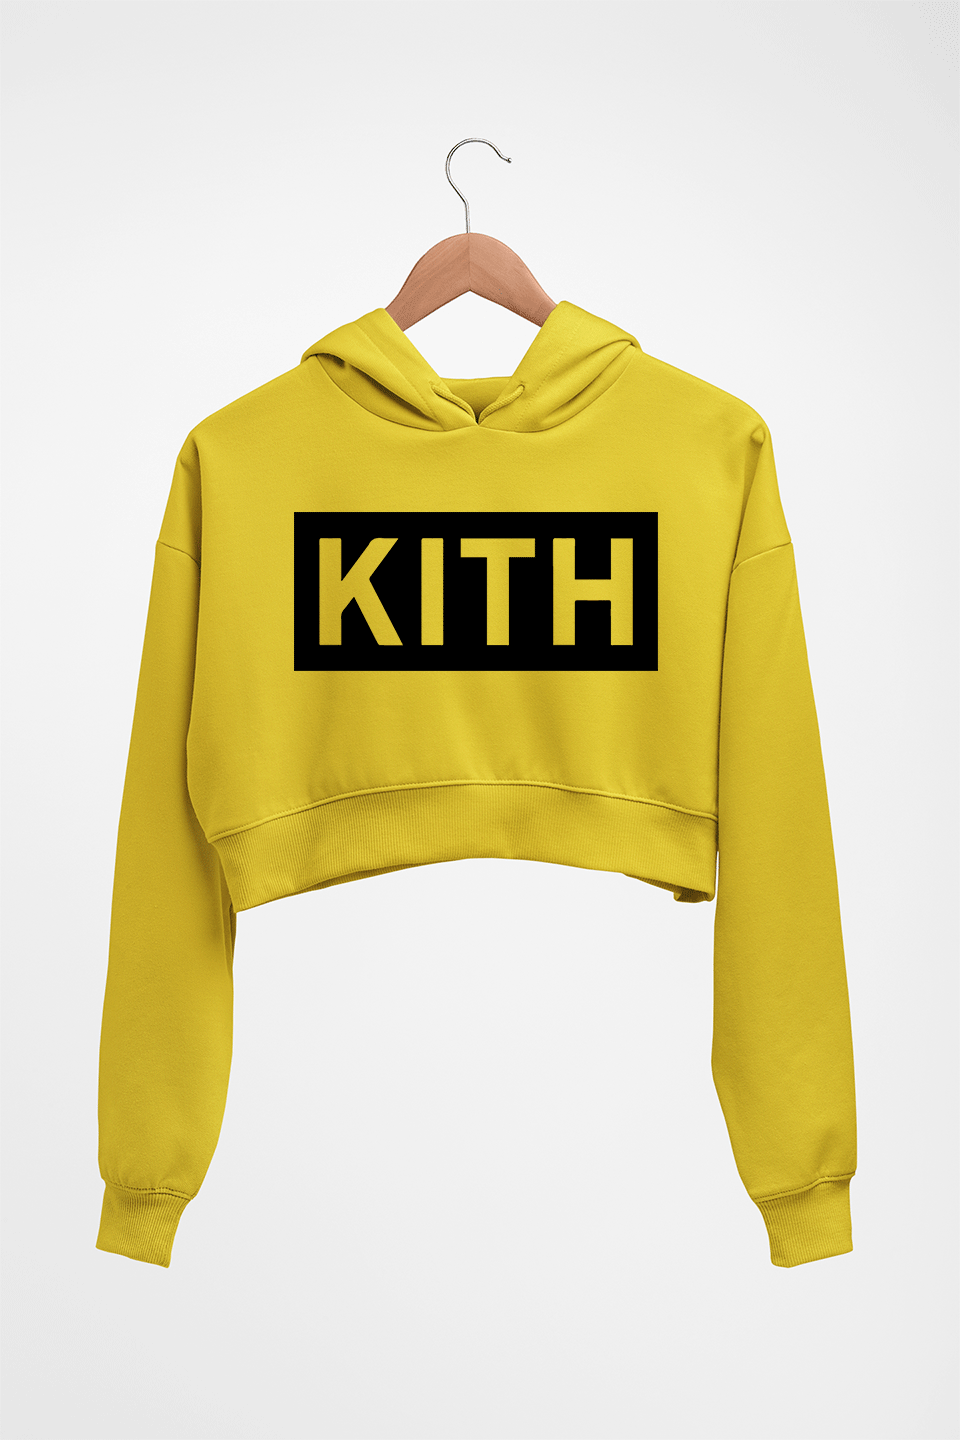 Kith Crop HOODIE FOR WOMEN